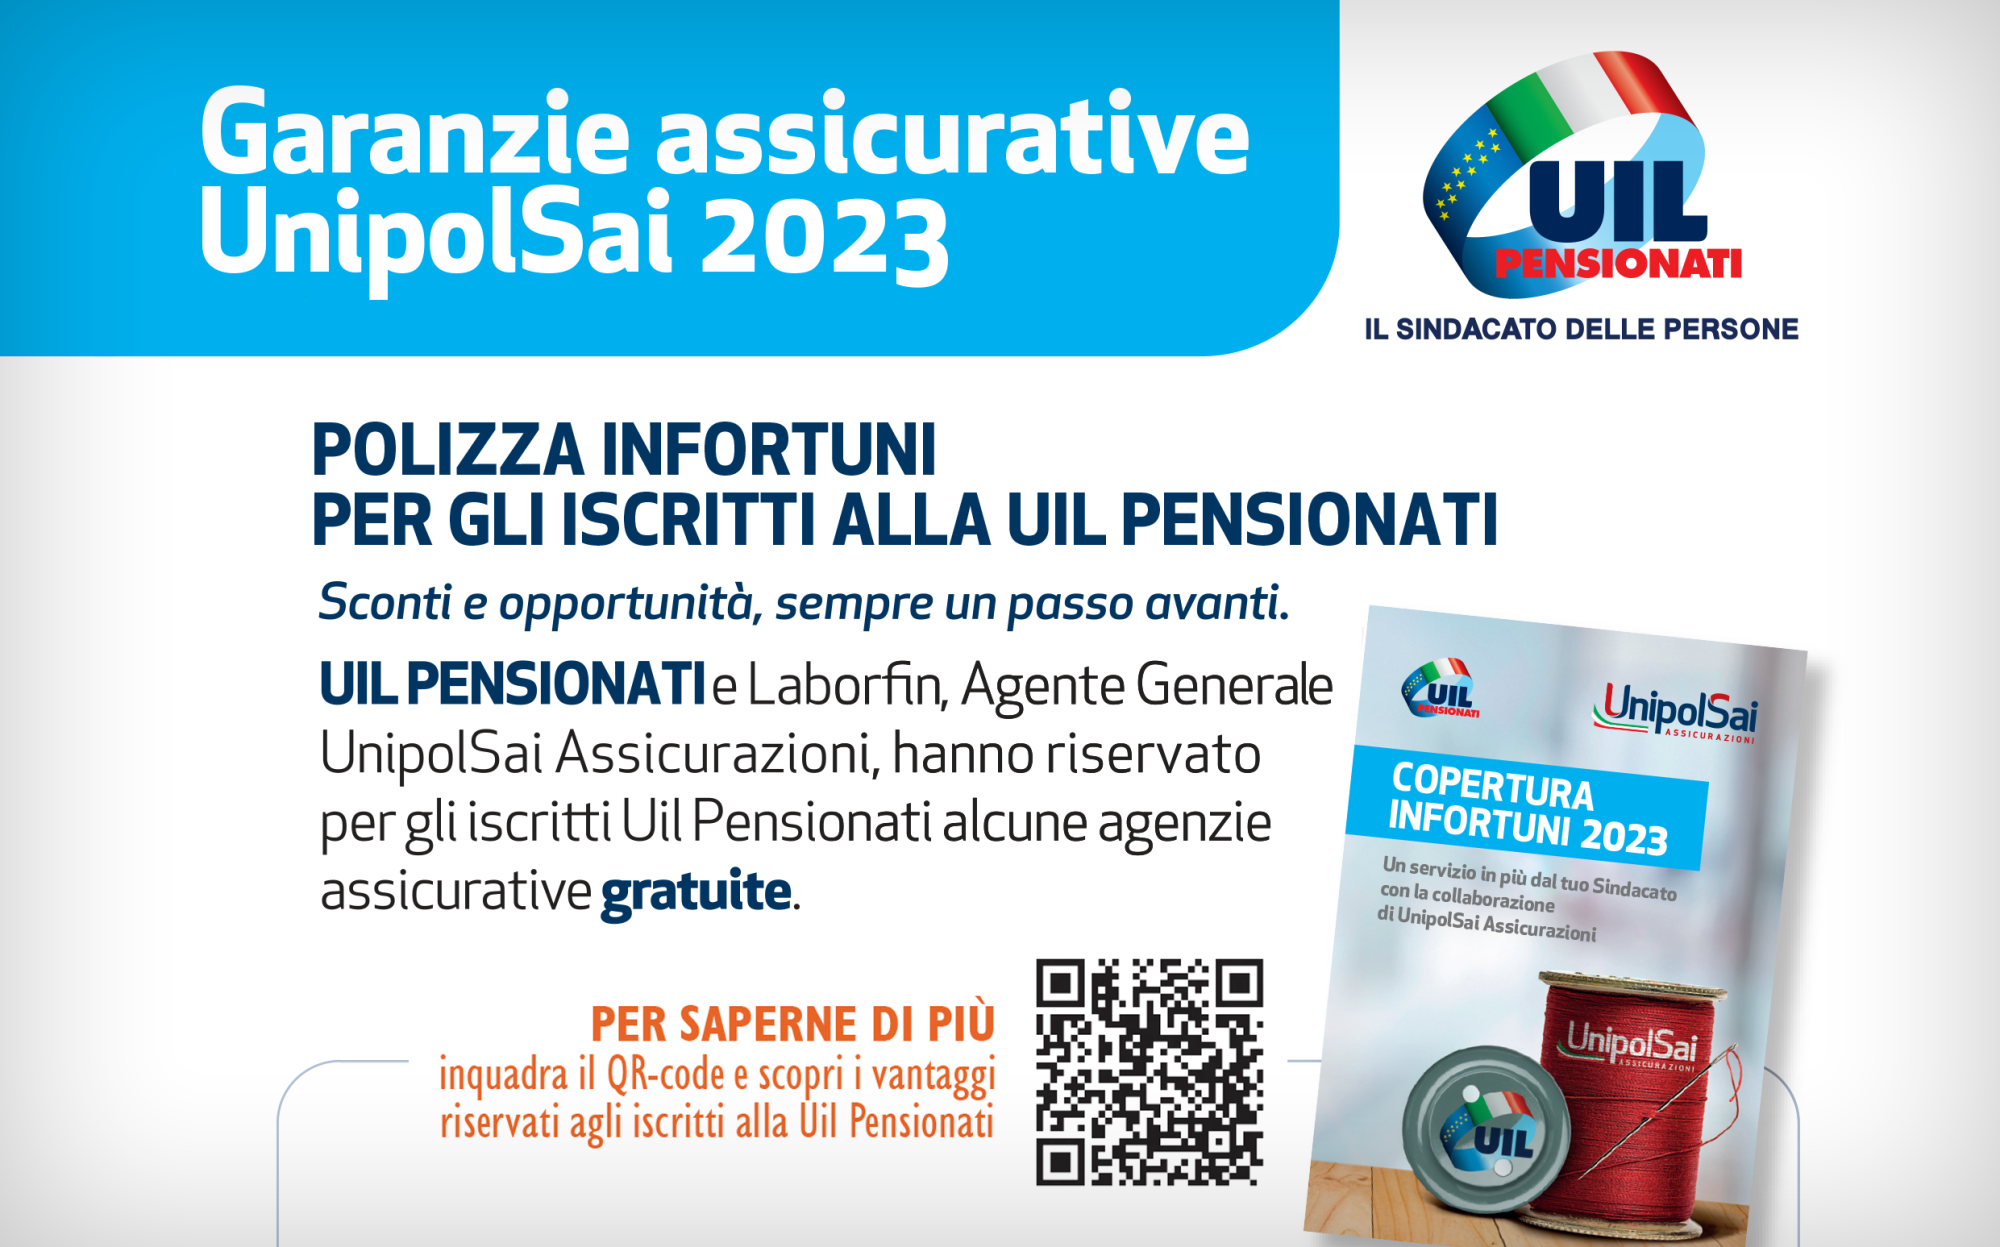 IMG preview Unipol 2023